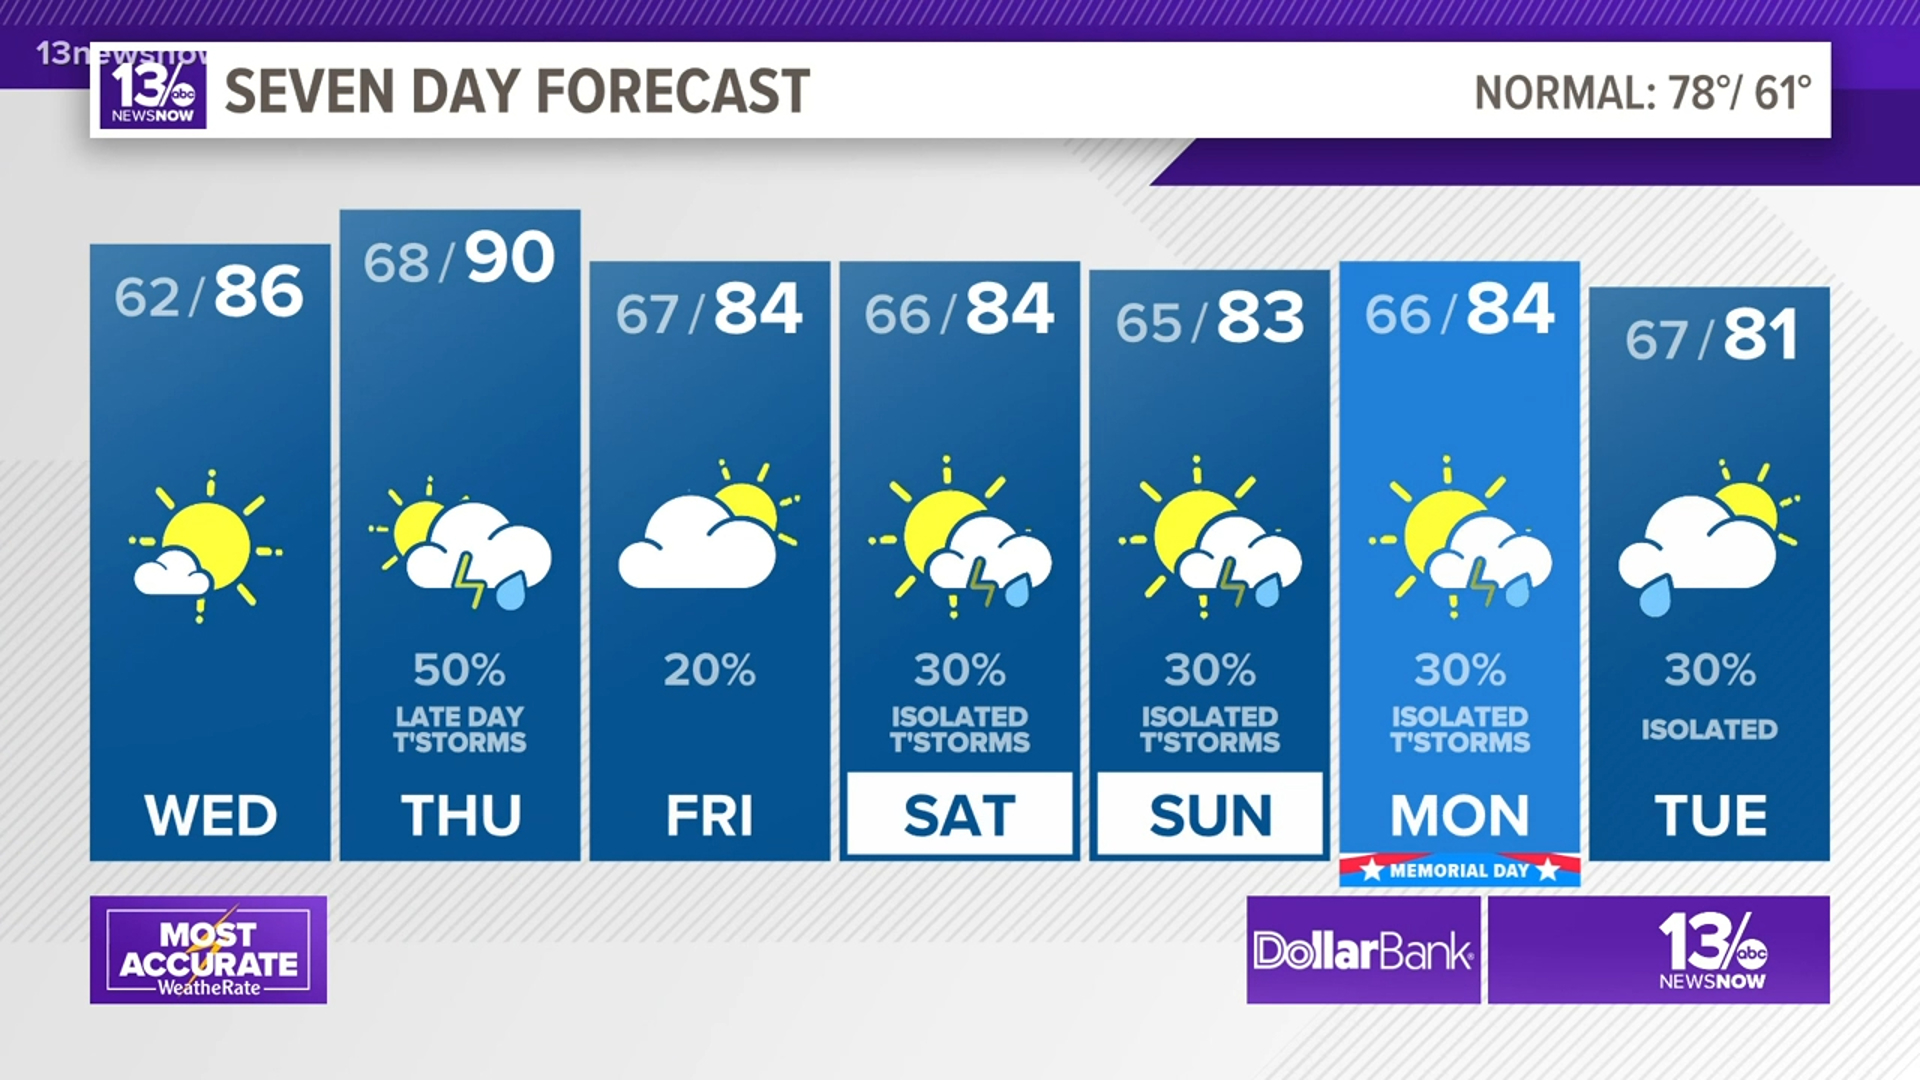 The next good chance for showers and storms comes late Thursday.